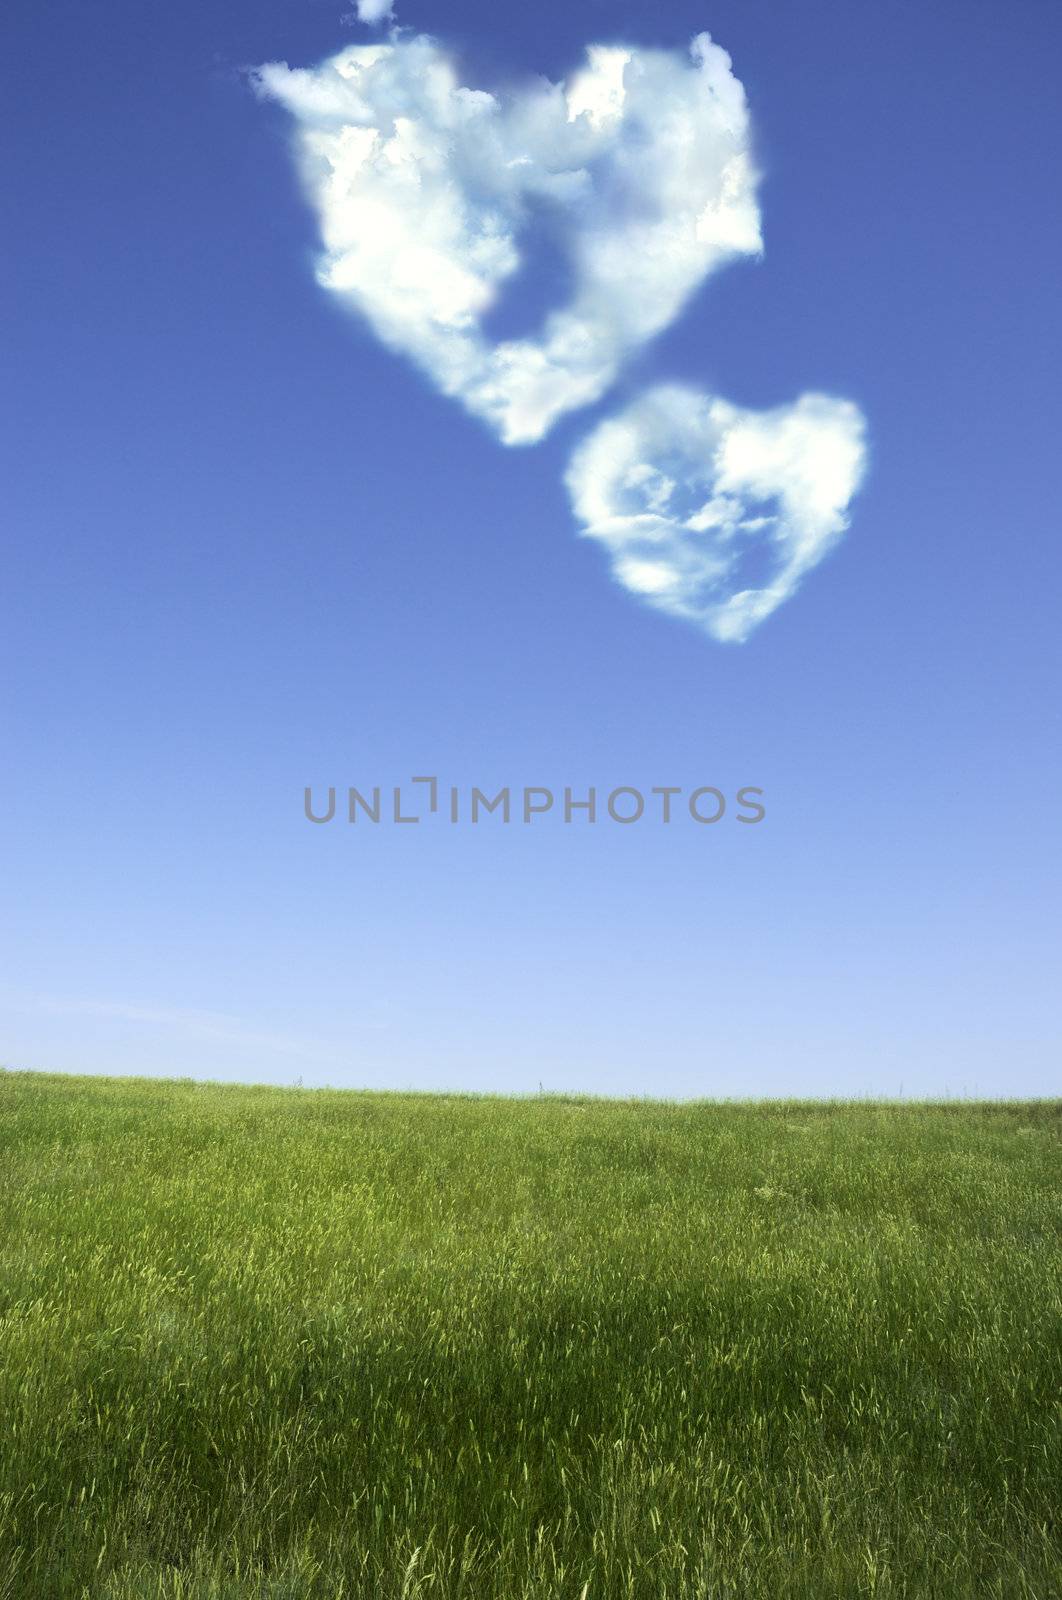 heart shapes on blue sky and fresh green grass